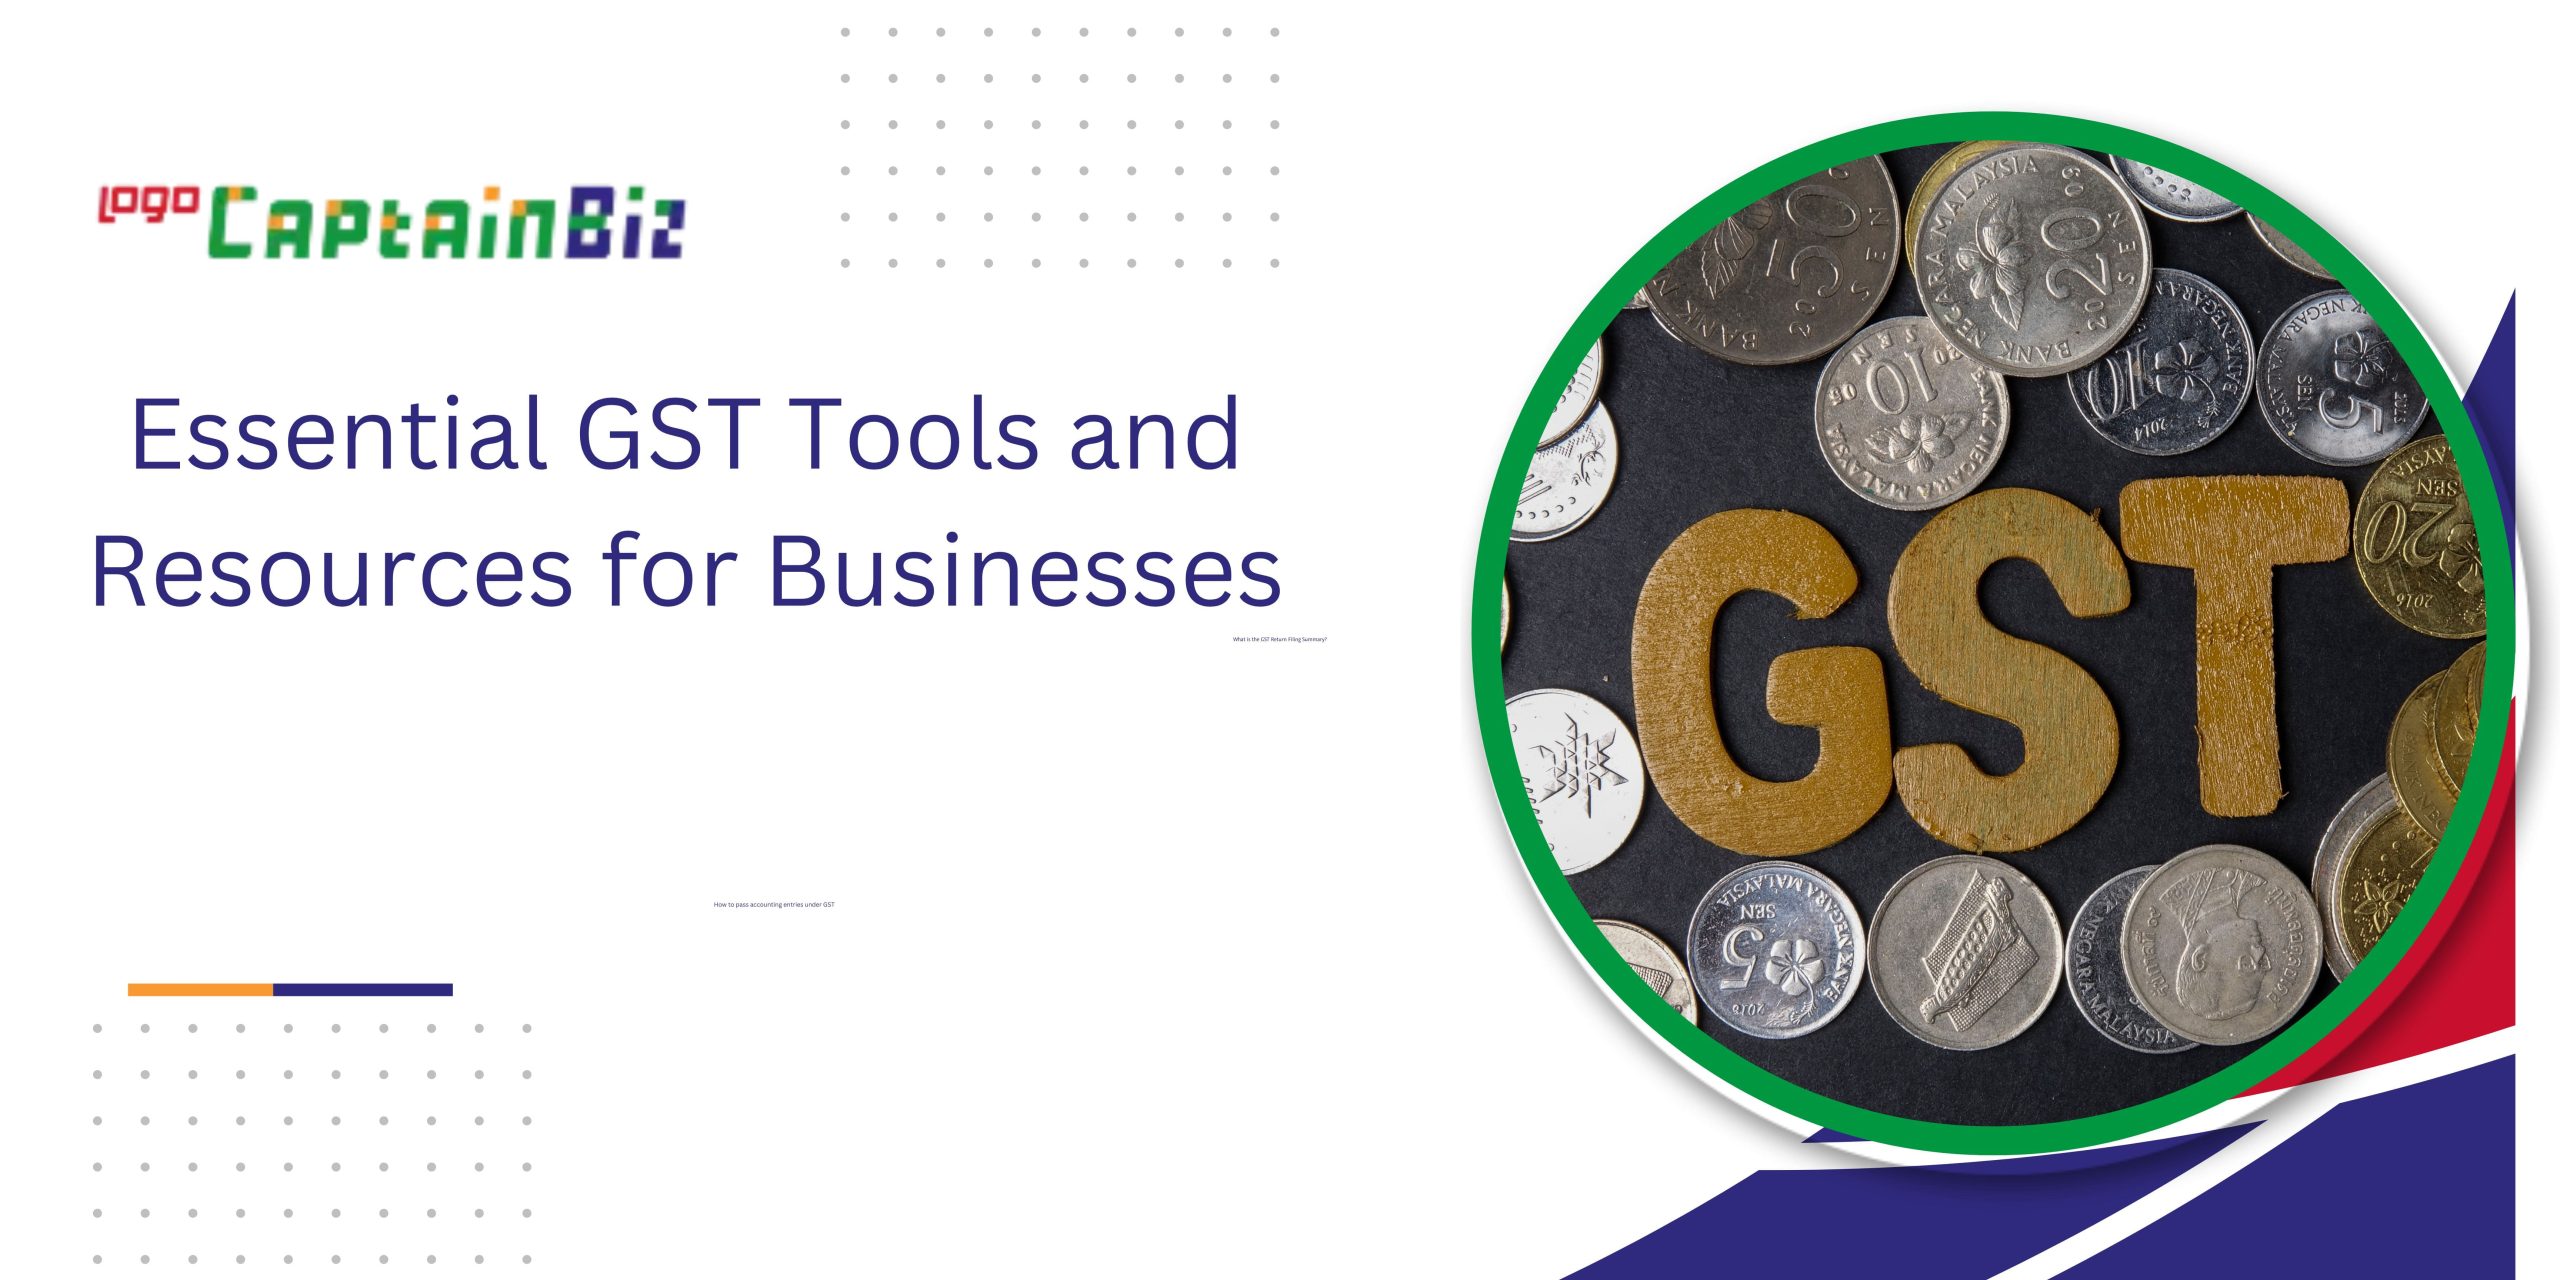 CaptainBiz: Essential GST Tools and Resources for Businesses